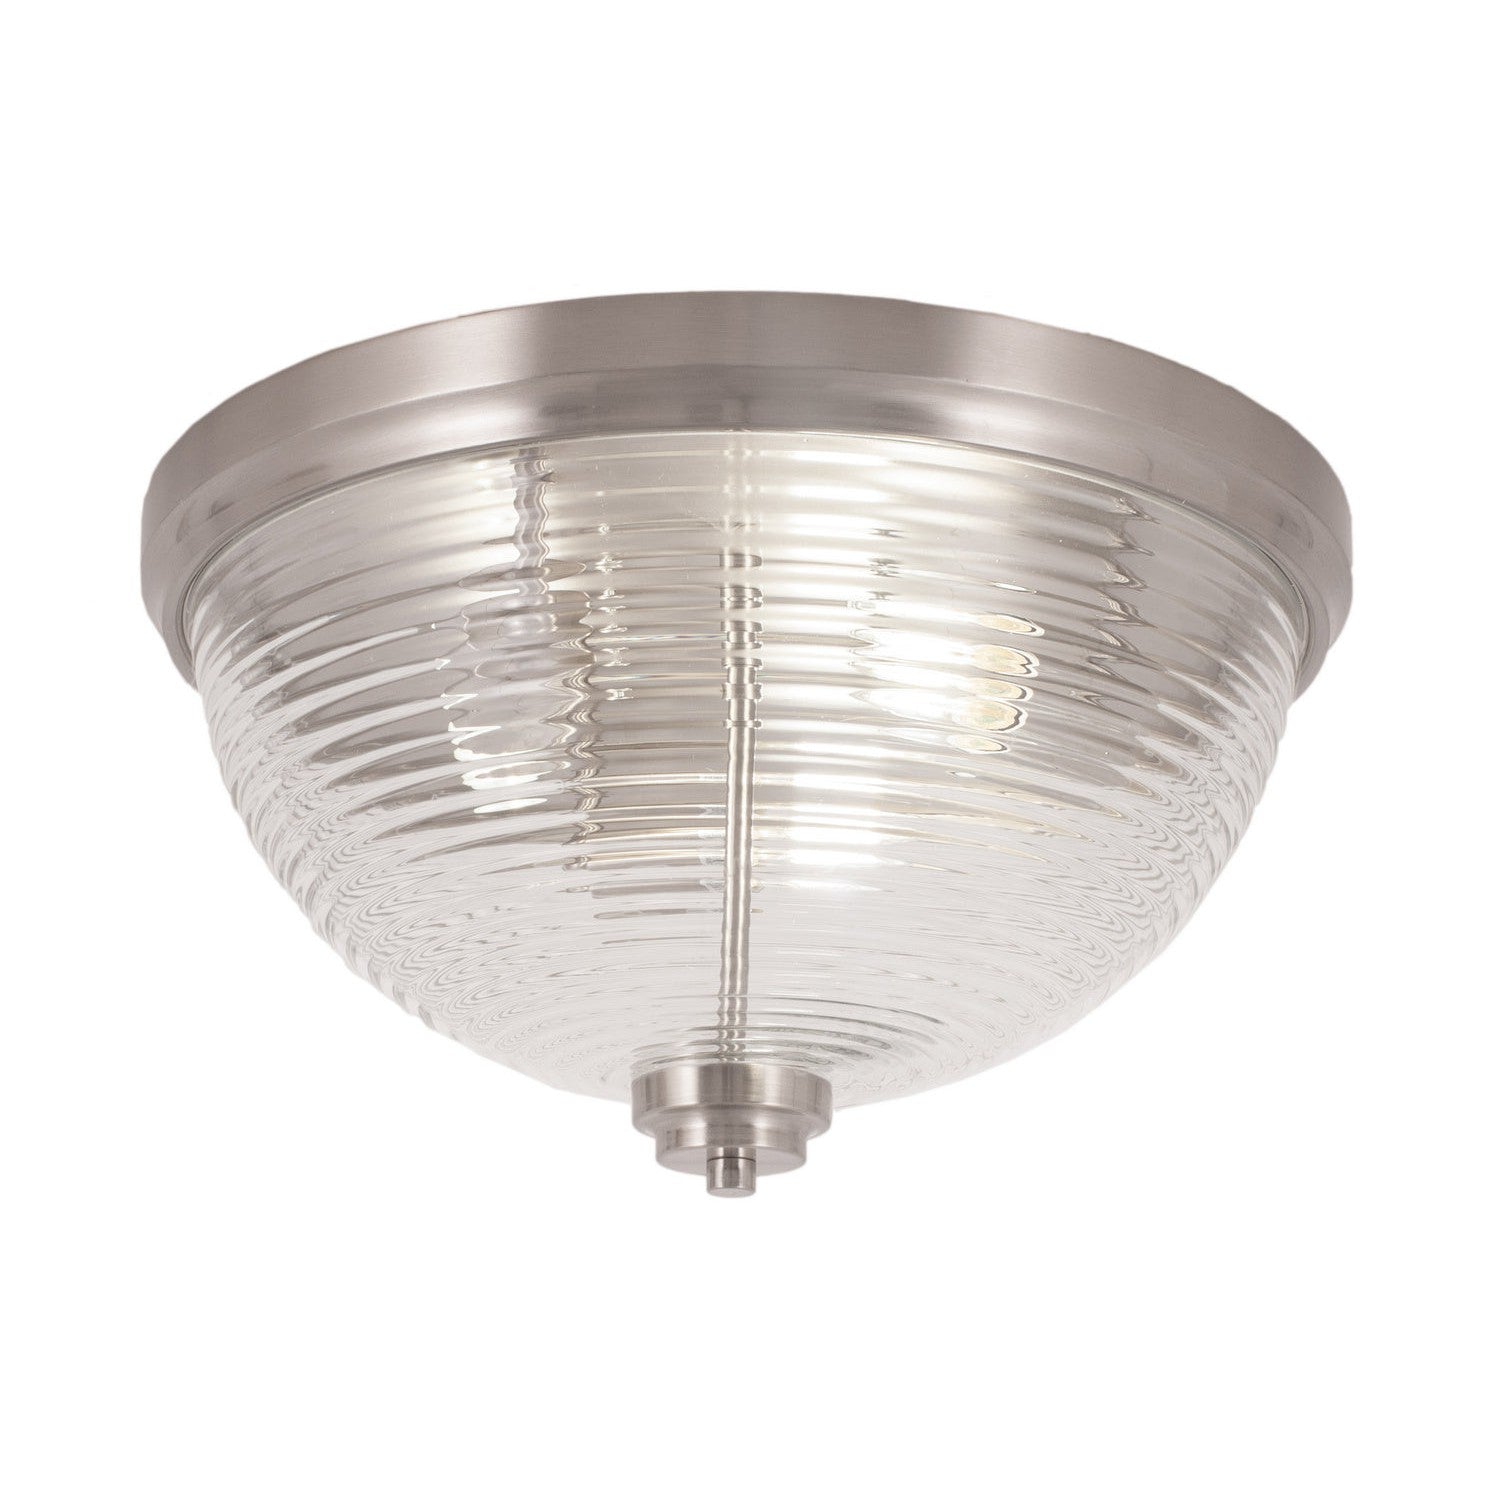 Toltec Any 826-bn-6 Ceiling Light - Brushed Nickel